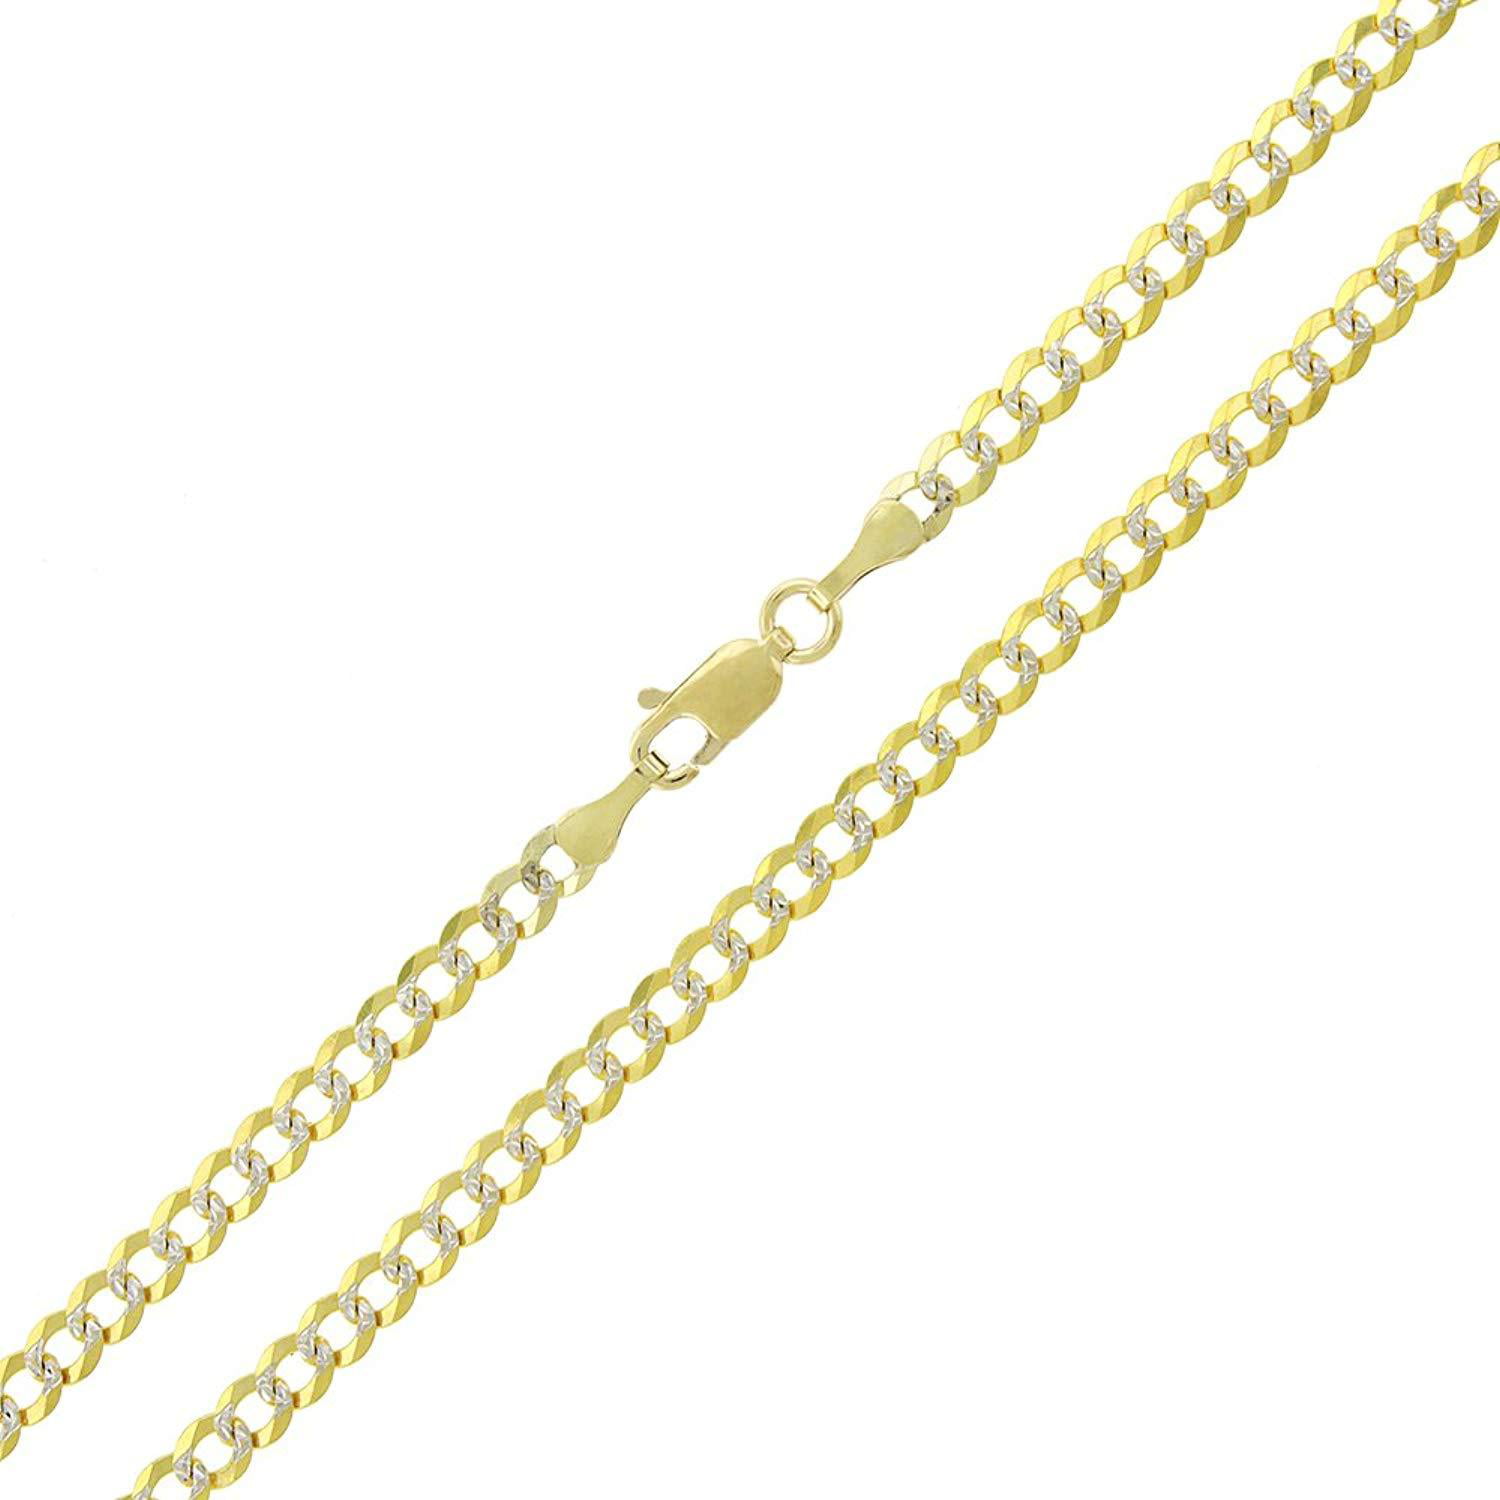 14K Yellow Gold Diamond Cut 3.5mm Cuban Curb Link Chain Necklace 18”